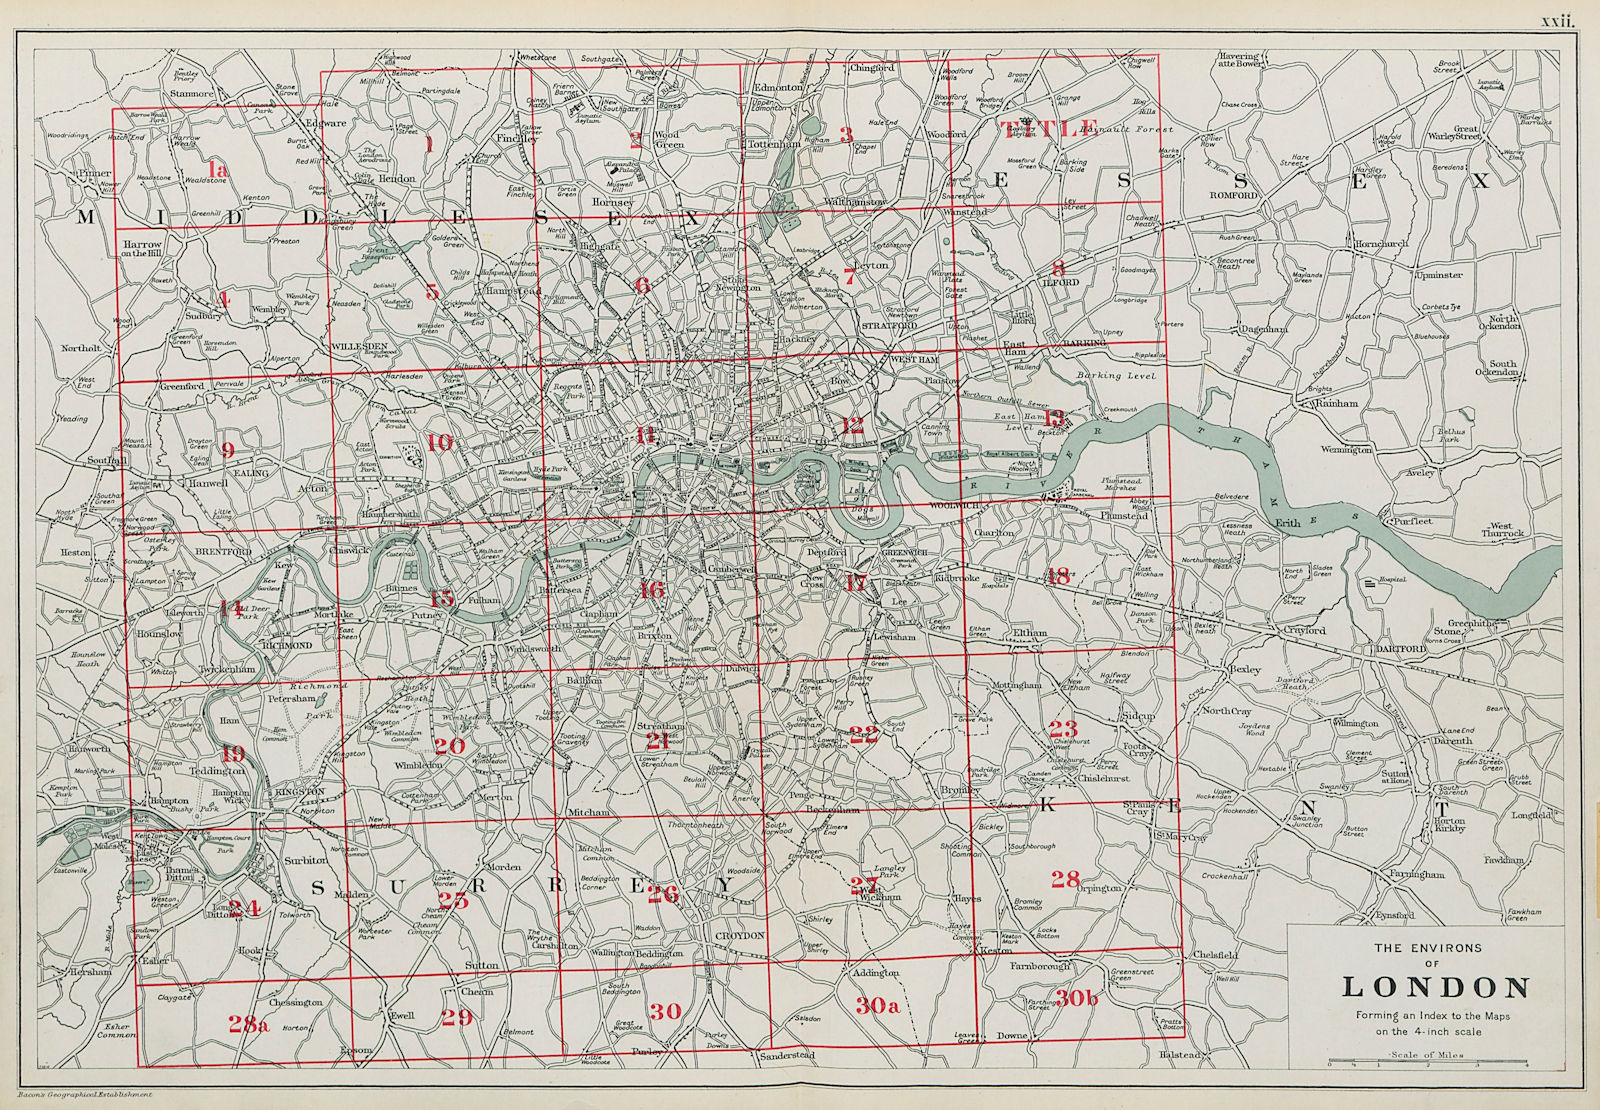 THE ENVIRONS OF LONDON. Index map. Main roads. BACON 1913 old antique